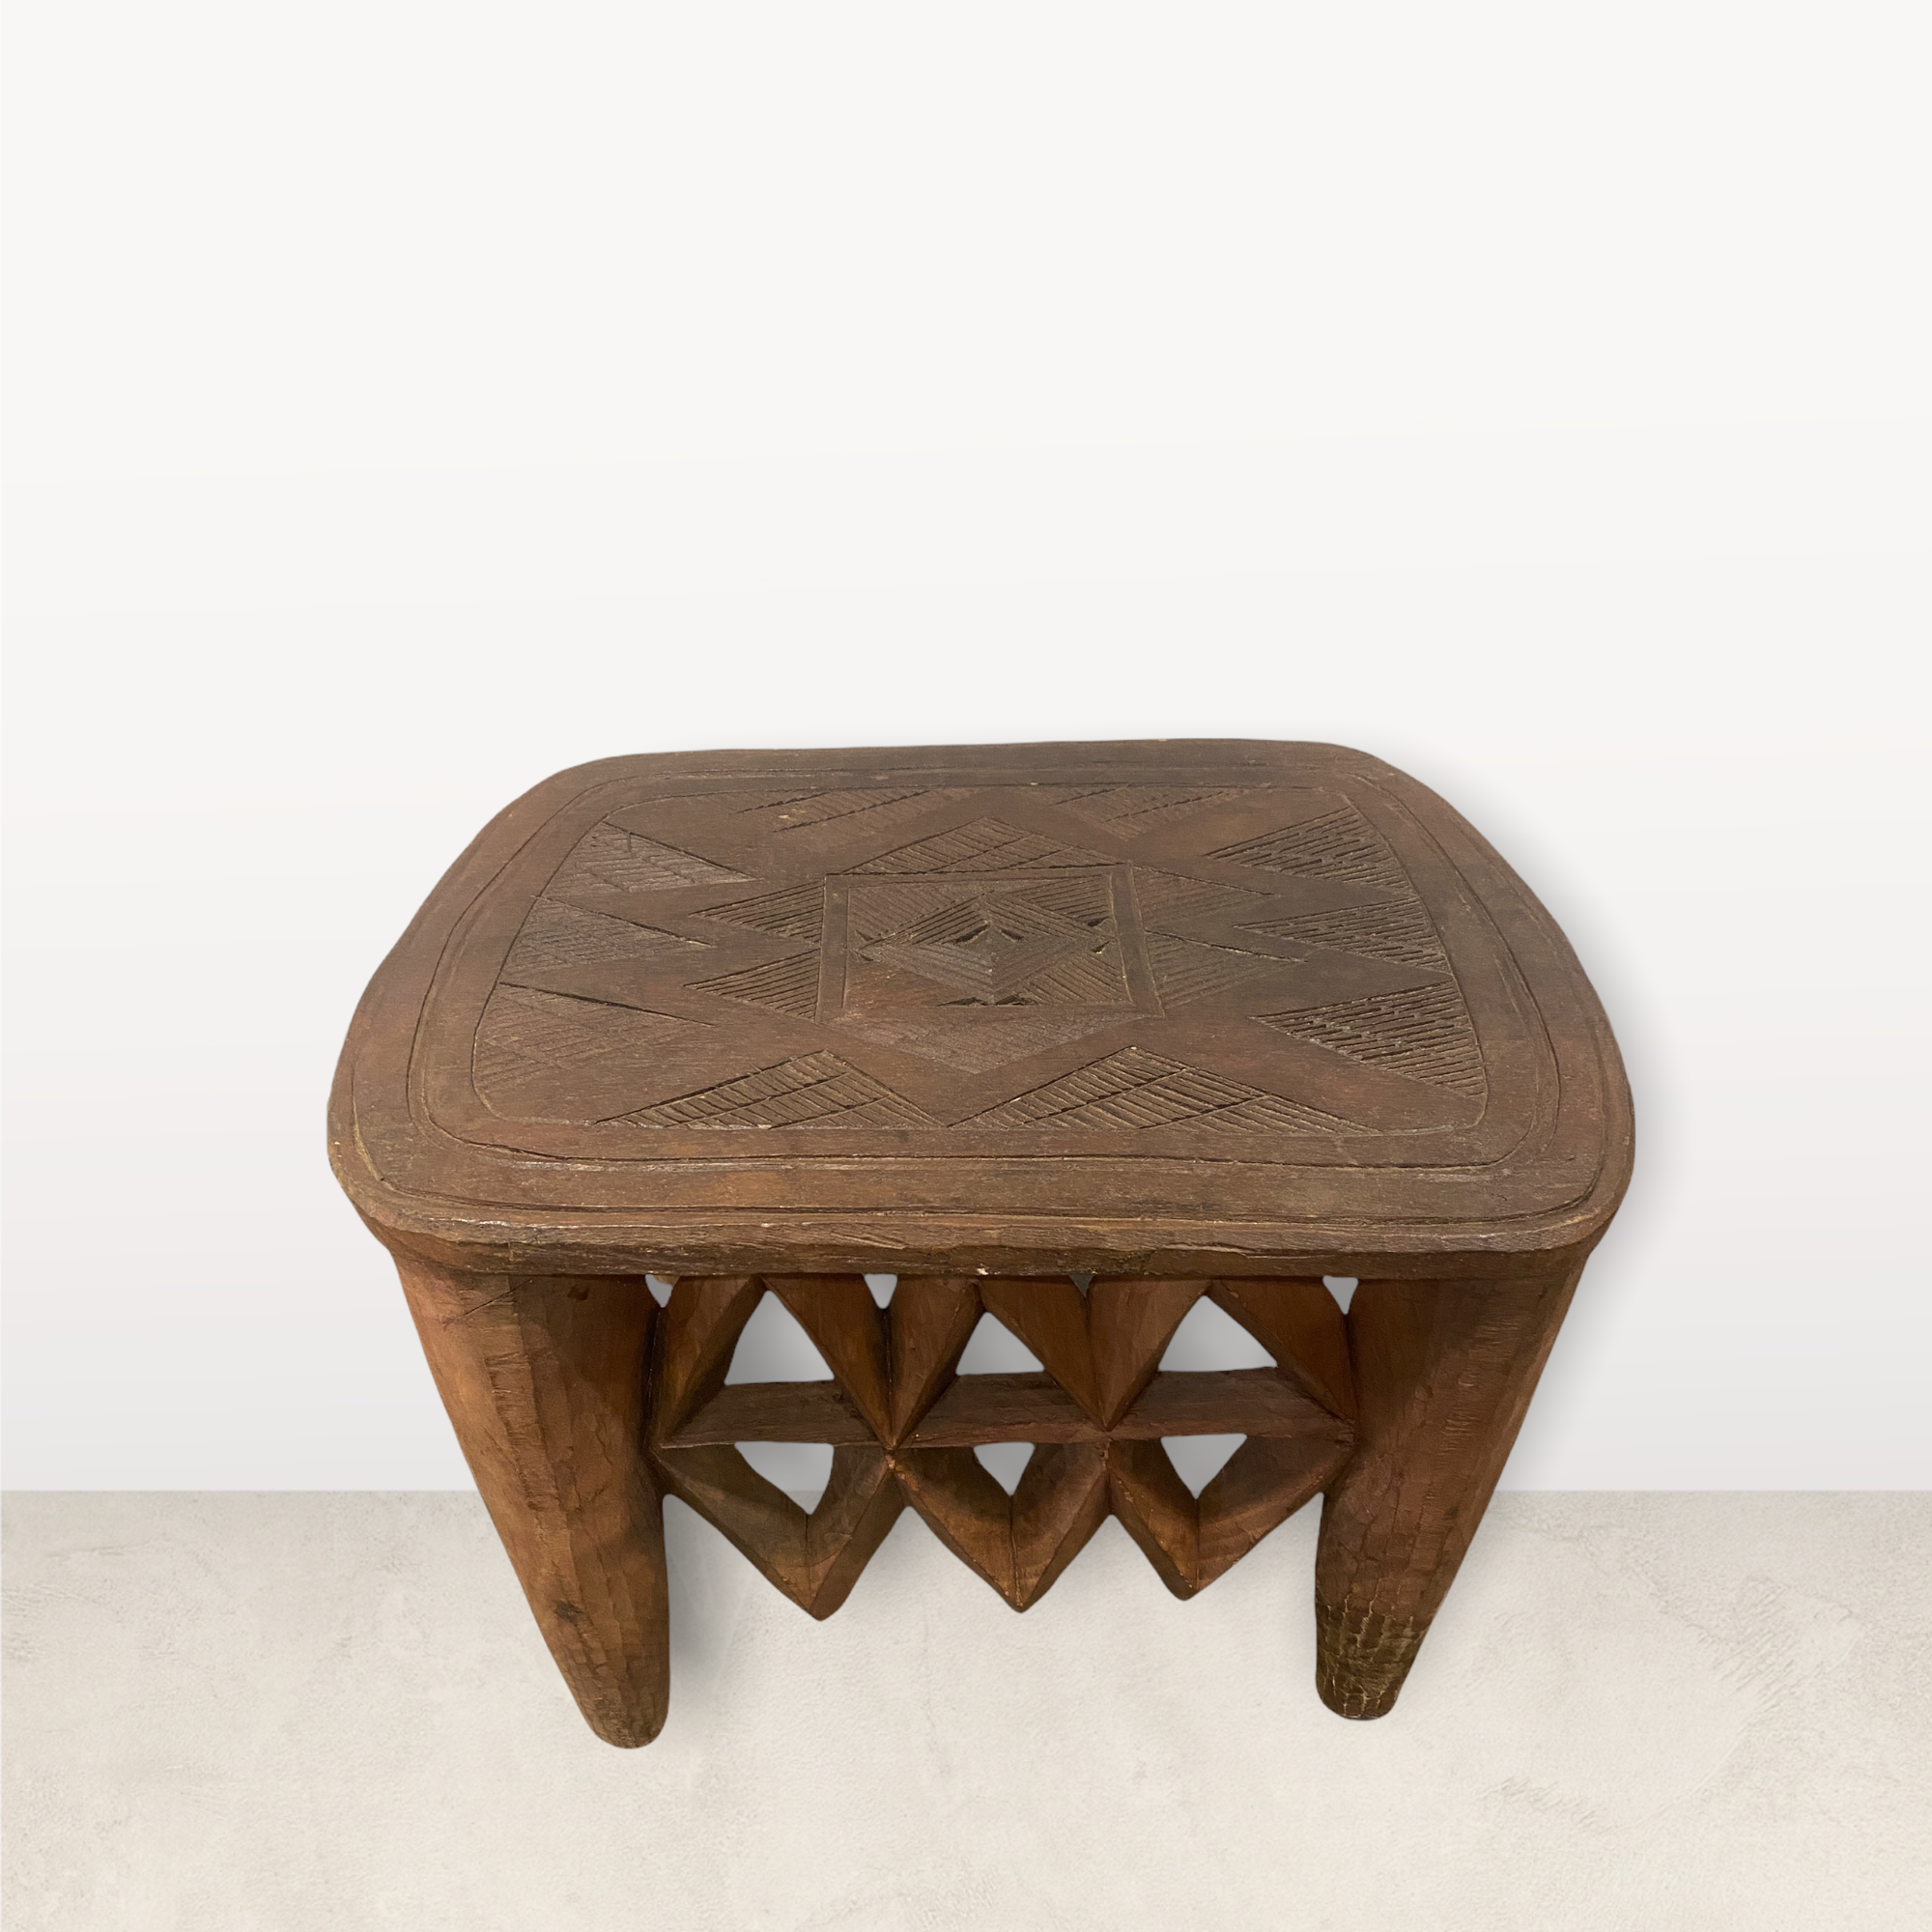 Nupe Table \ Stool - Square engraved (L12.1)